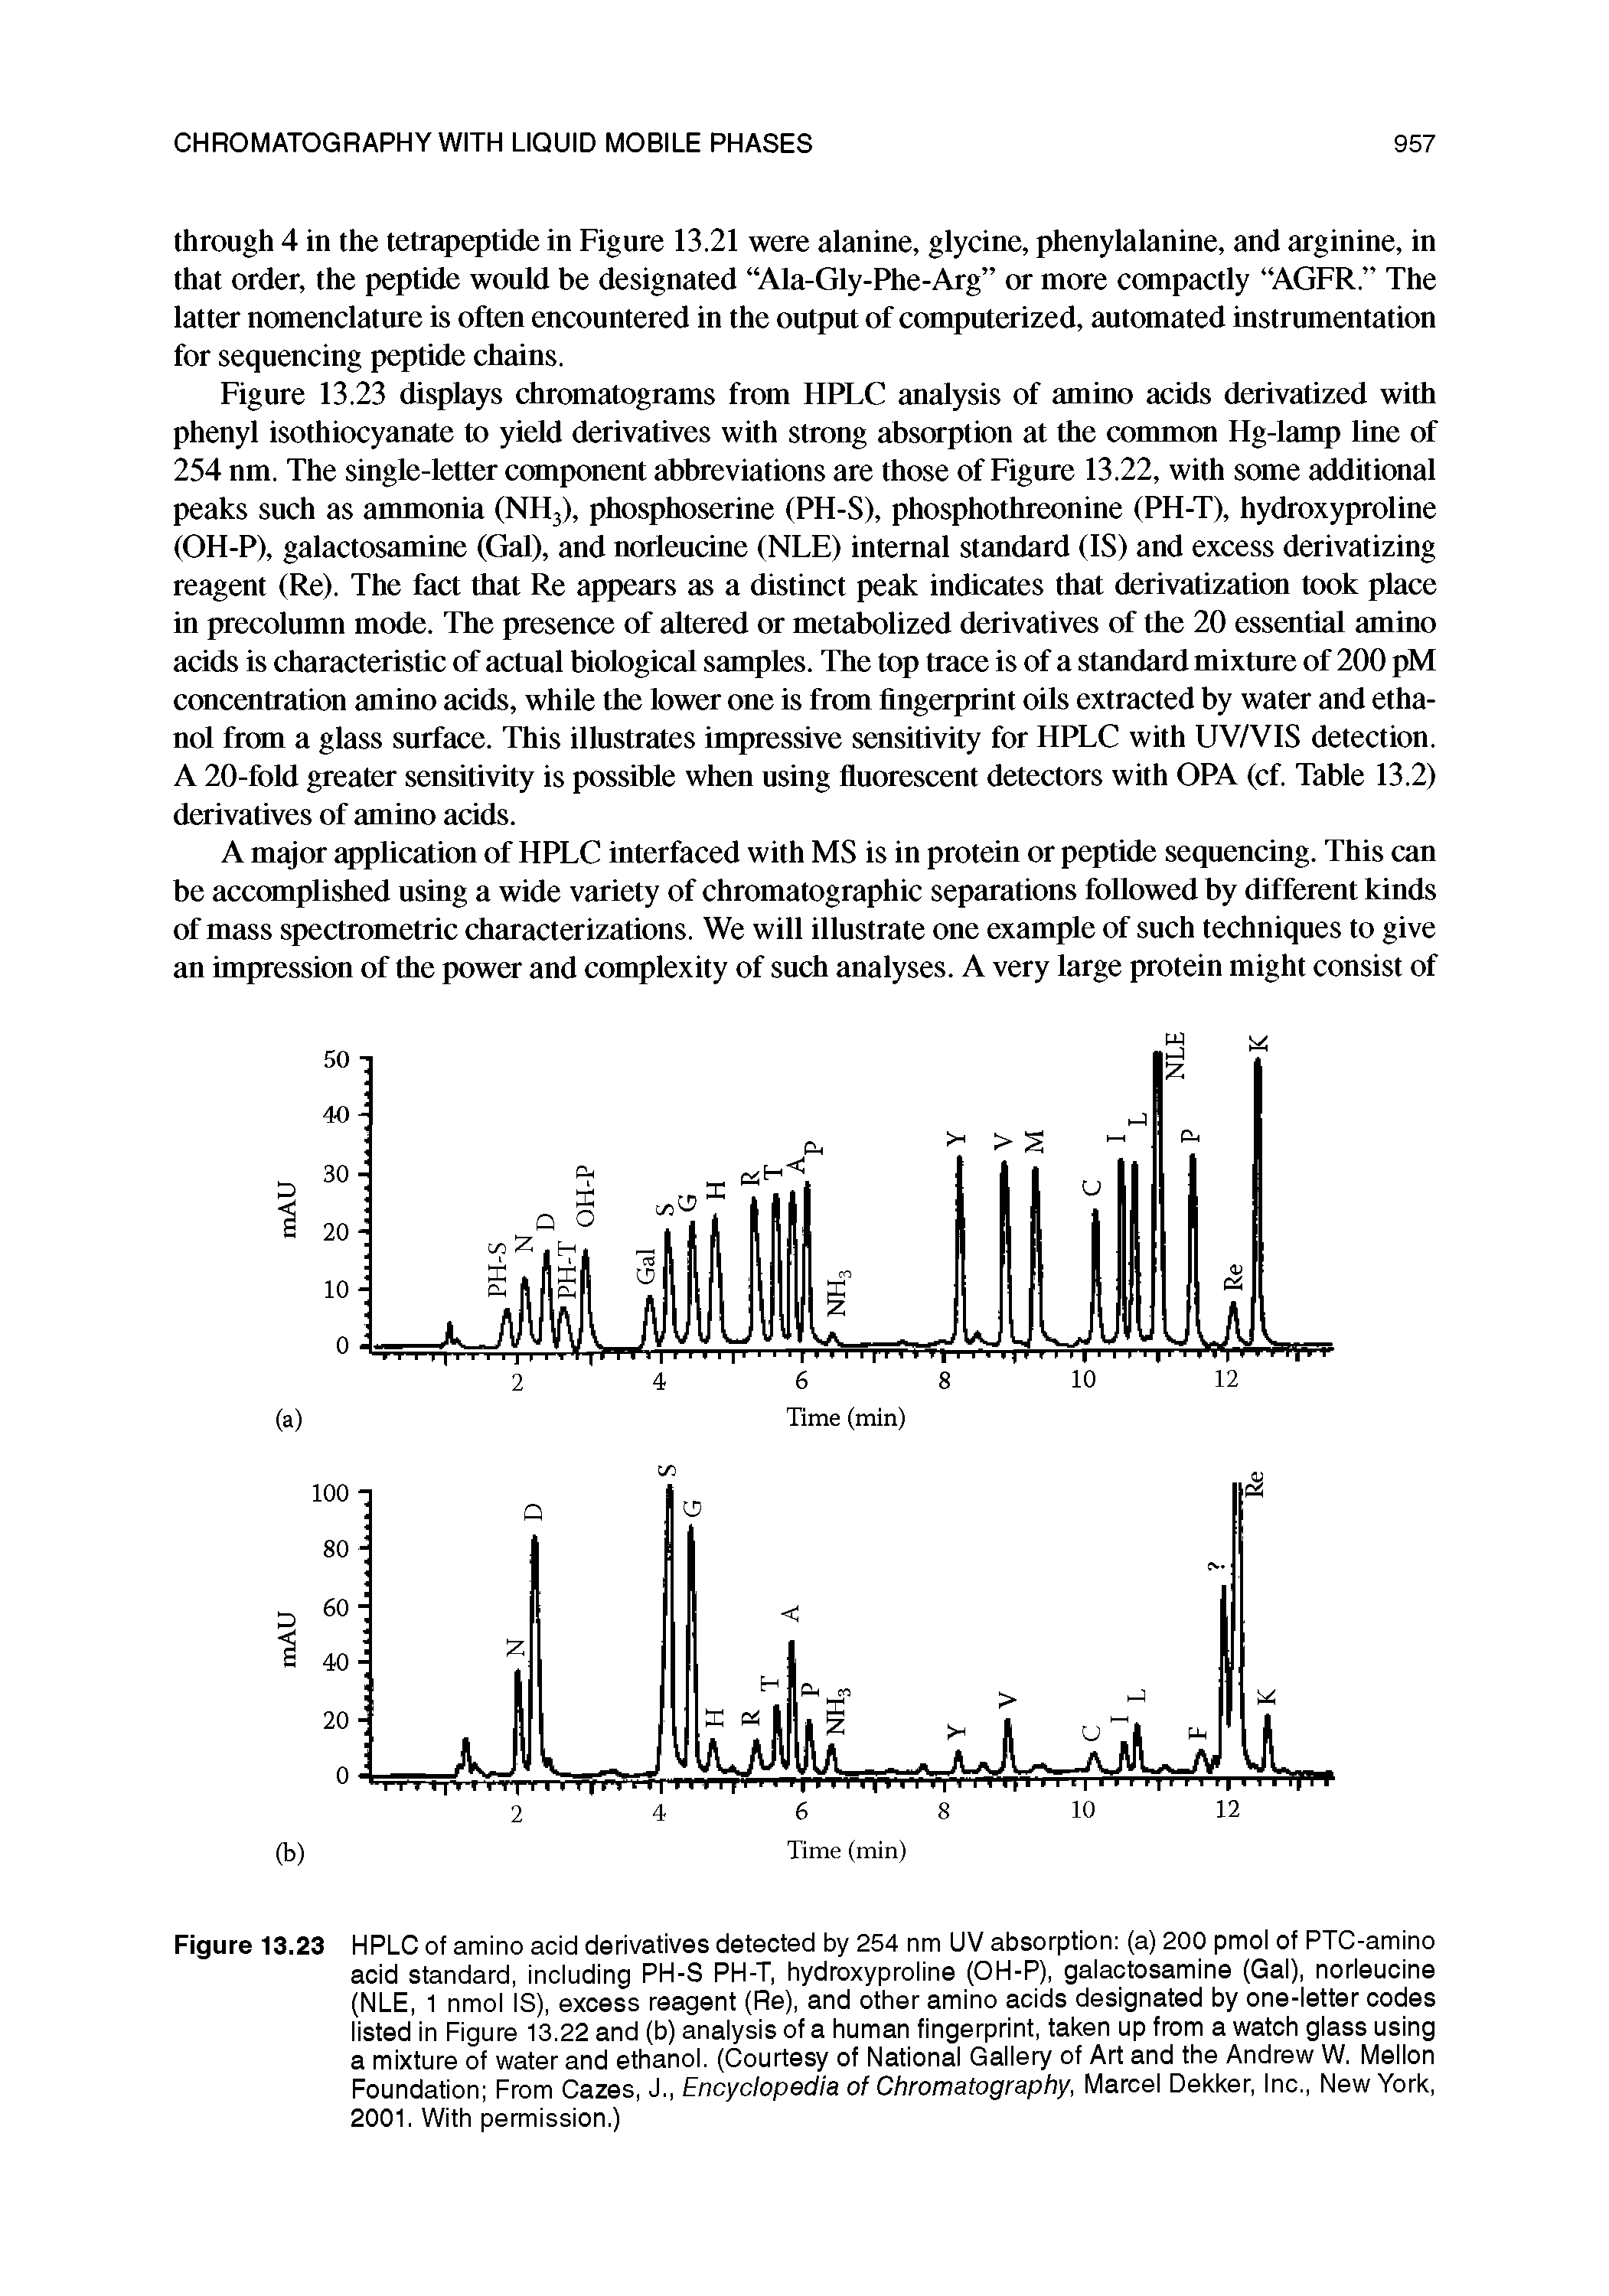 Figure 13.23 HPLC of amino acid derivatives detected by 254 nm UV absorption (a) 200 pmol of PTC-amino acid standard, including PH-S PH-T, hydroxyproline (OH-P), galactosamine (Gal), norleucine (NLE, 1 nmol IS), excess reagent (Re), and other amino acids designated by one-letter codes listed in Figure 13.22 and (b) analysis of a human fingerprint, taken up from a watch glass using a mixture of water and ethanol. (Courtesy of National Gallery of Art and the Andrew W. Mellon Foundation From Cazes, J., Encyclopedia of Chromatography, Marcel Dekker, Inc., New York, 2001. With permission.)...